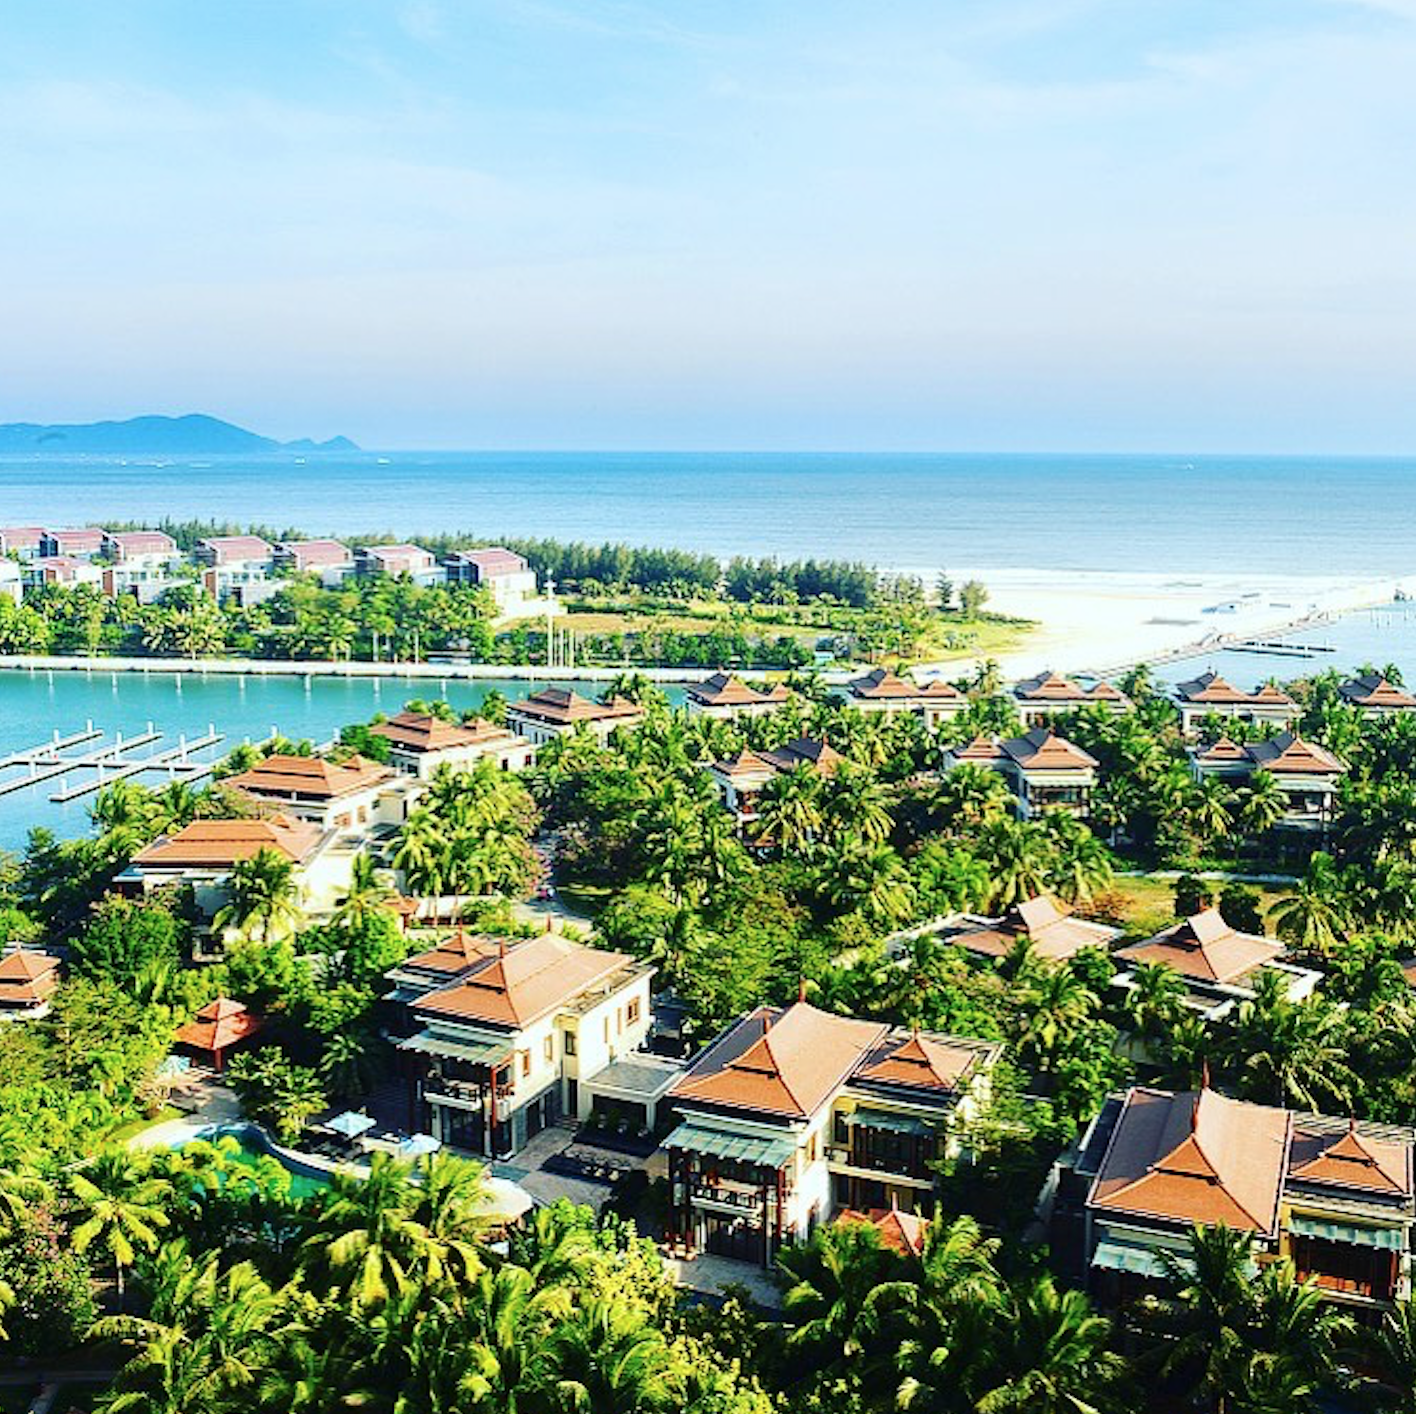 Tropical Hainan is an obvious getaway destination for Chinese mainlanders unable to travel overseas during Covid-19 – and it’s reaping the rewards as a result. Photo: @thisishainangov/Instagram